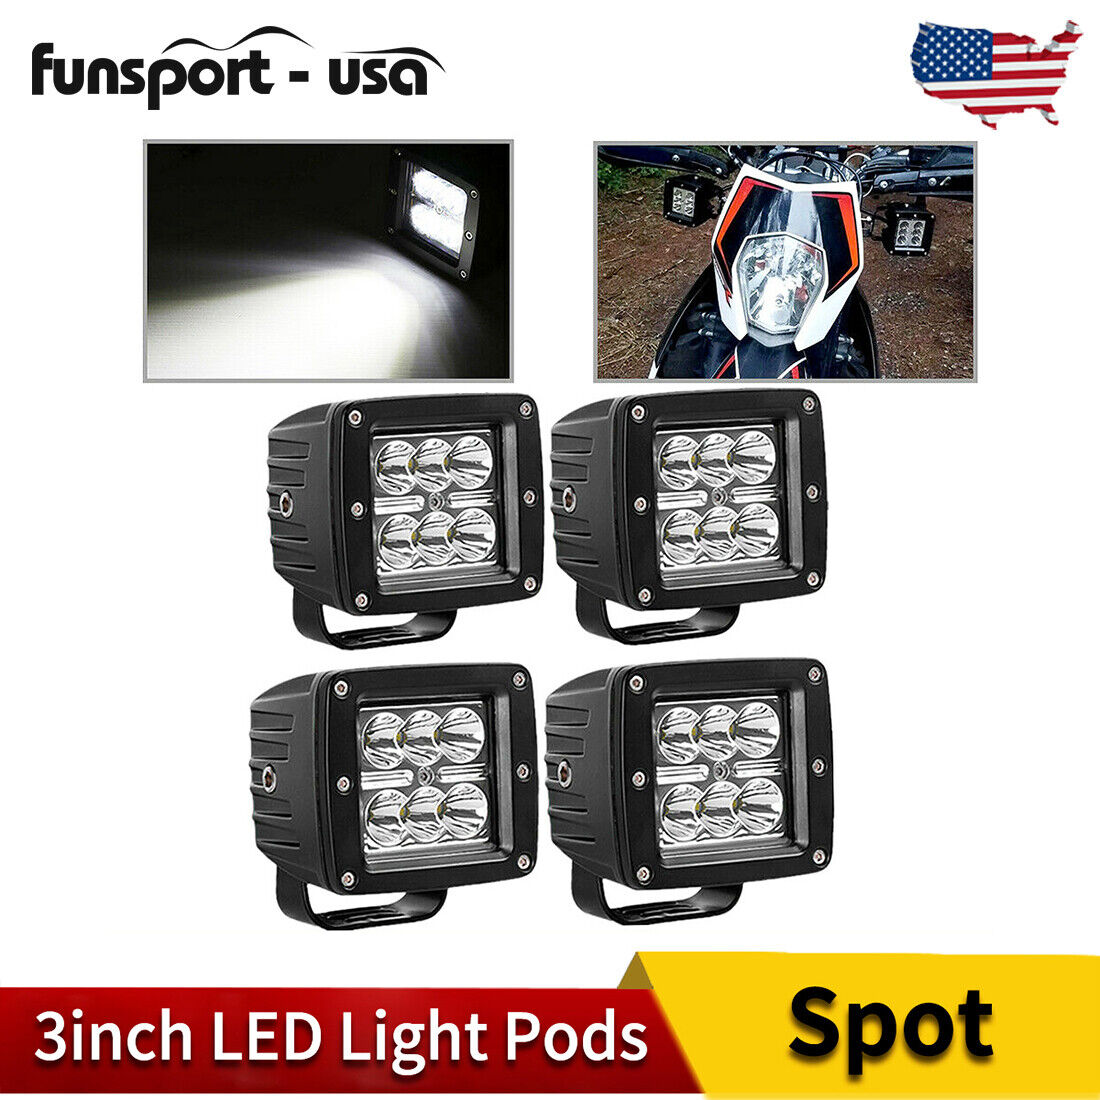 4x 3inch 60W LED Work Light Bar Spot Pods Driving Fog Lamp For Jeep Ford SUV ATV